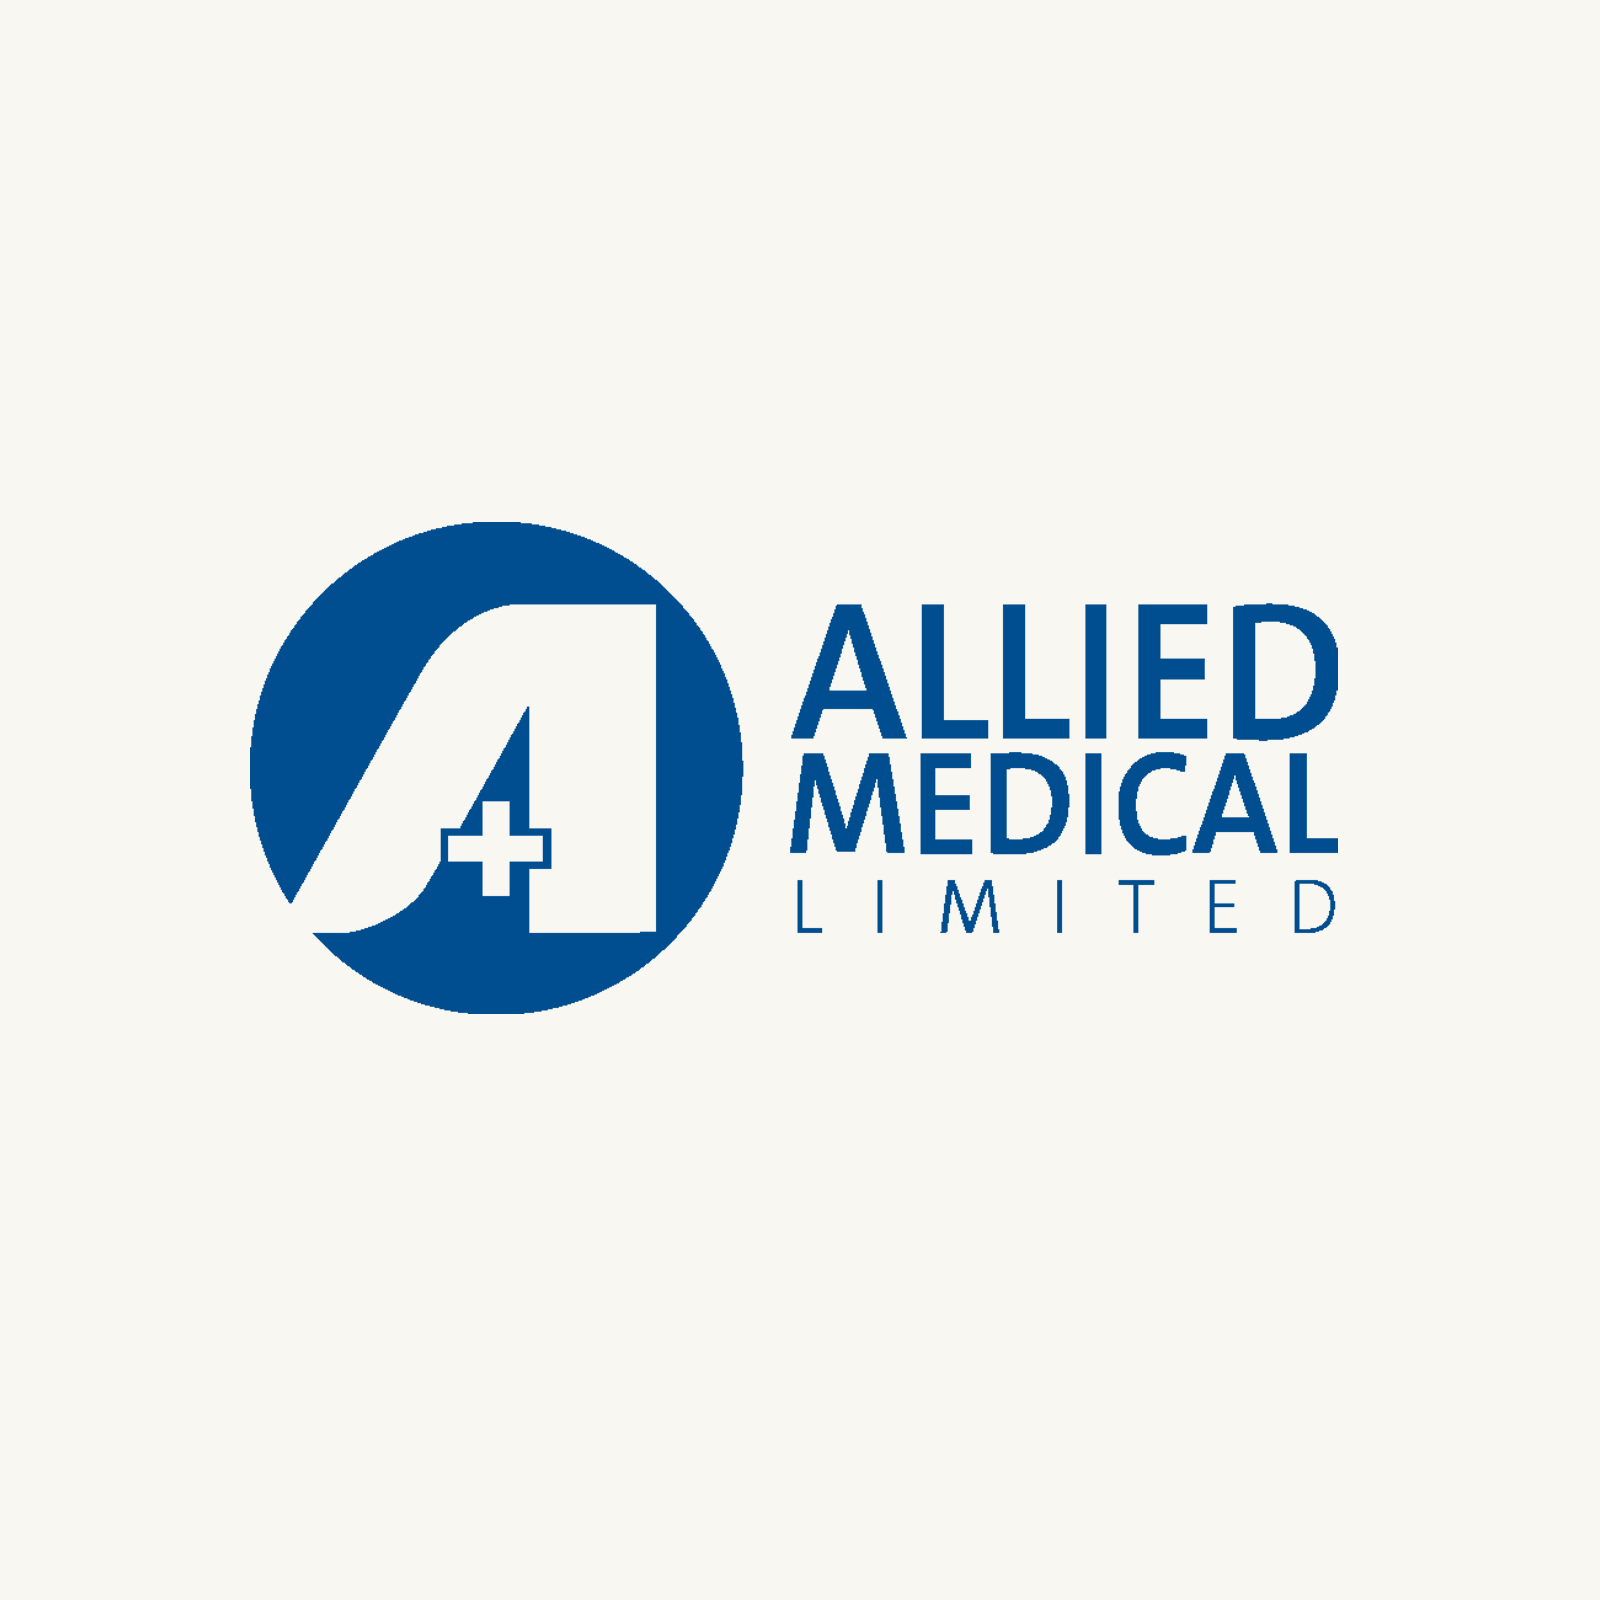 Clinton McClean appointed as Supply Chain Manager at Allied Medical.